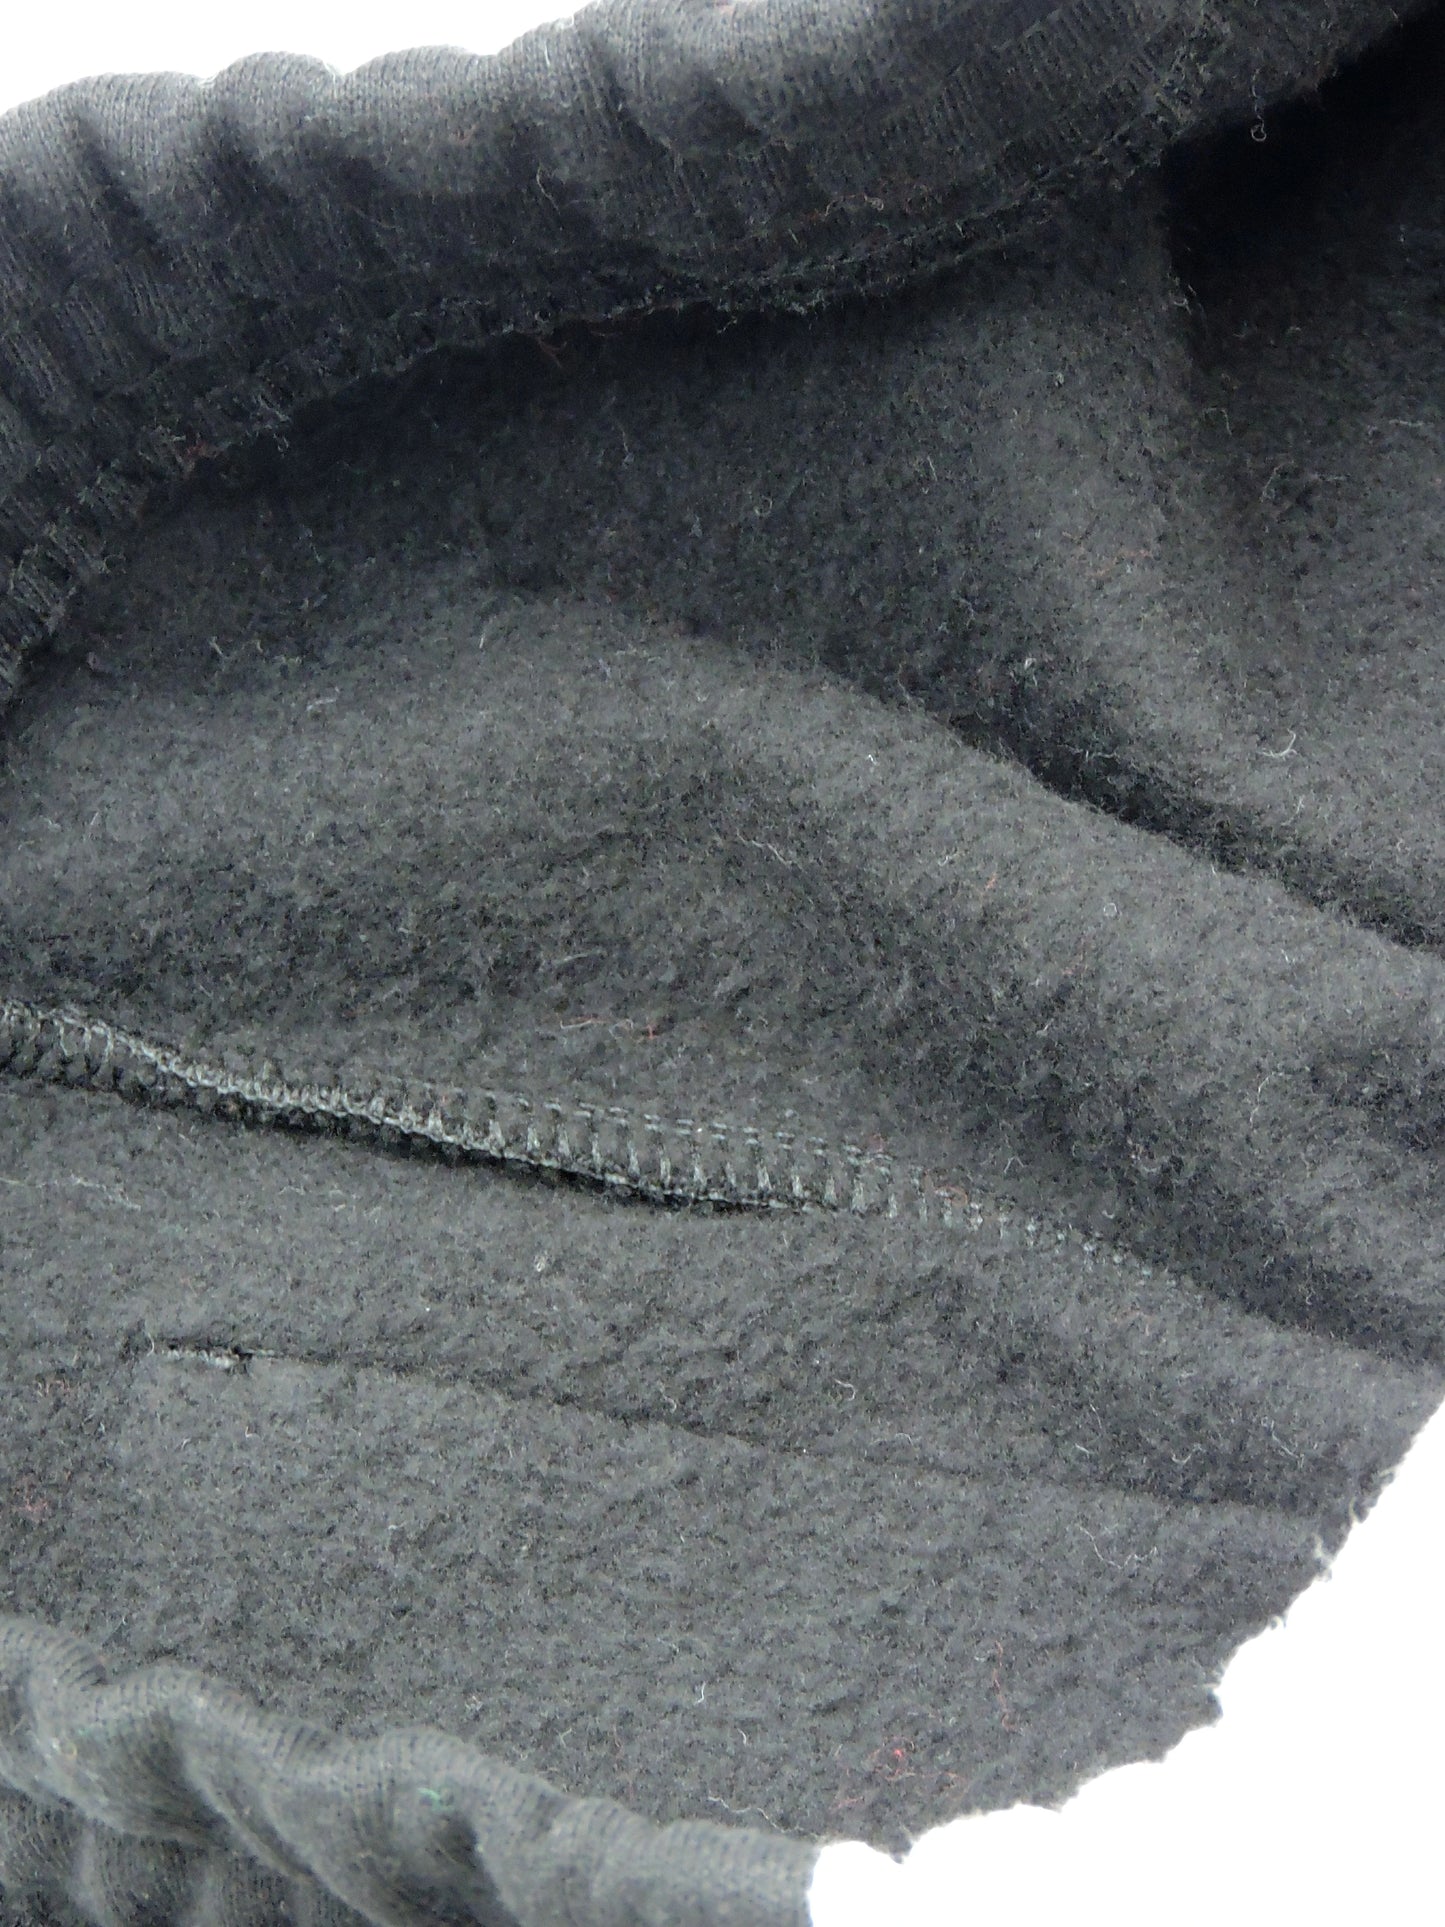 Close-up of soft cotton material inside the pants.